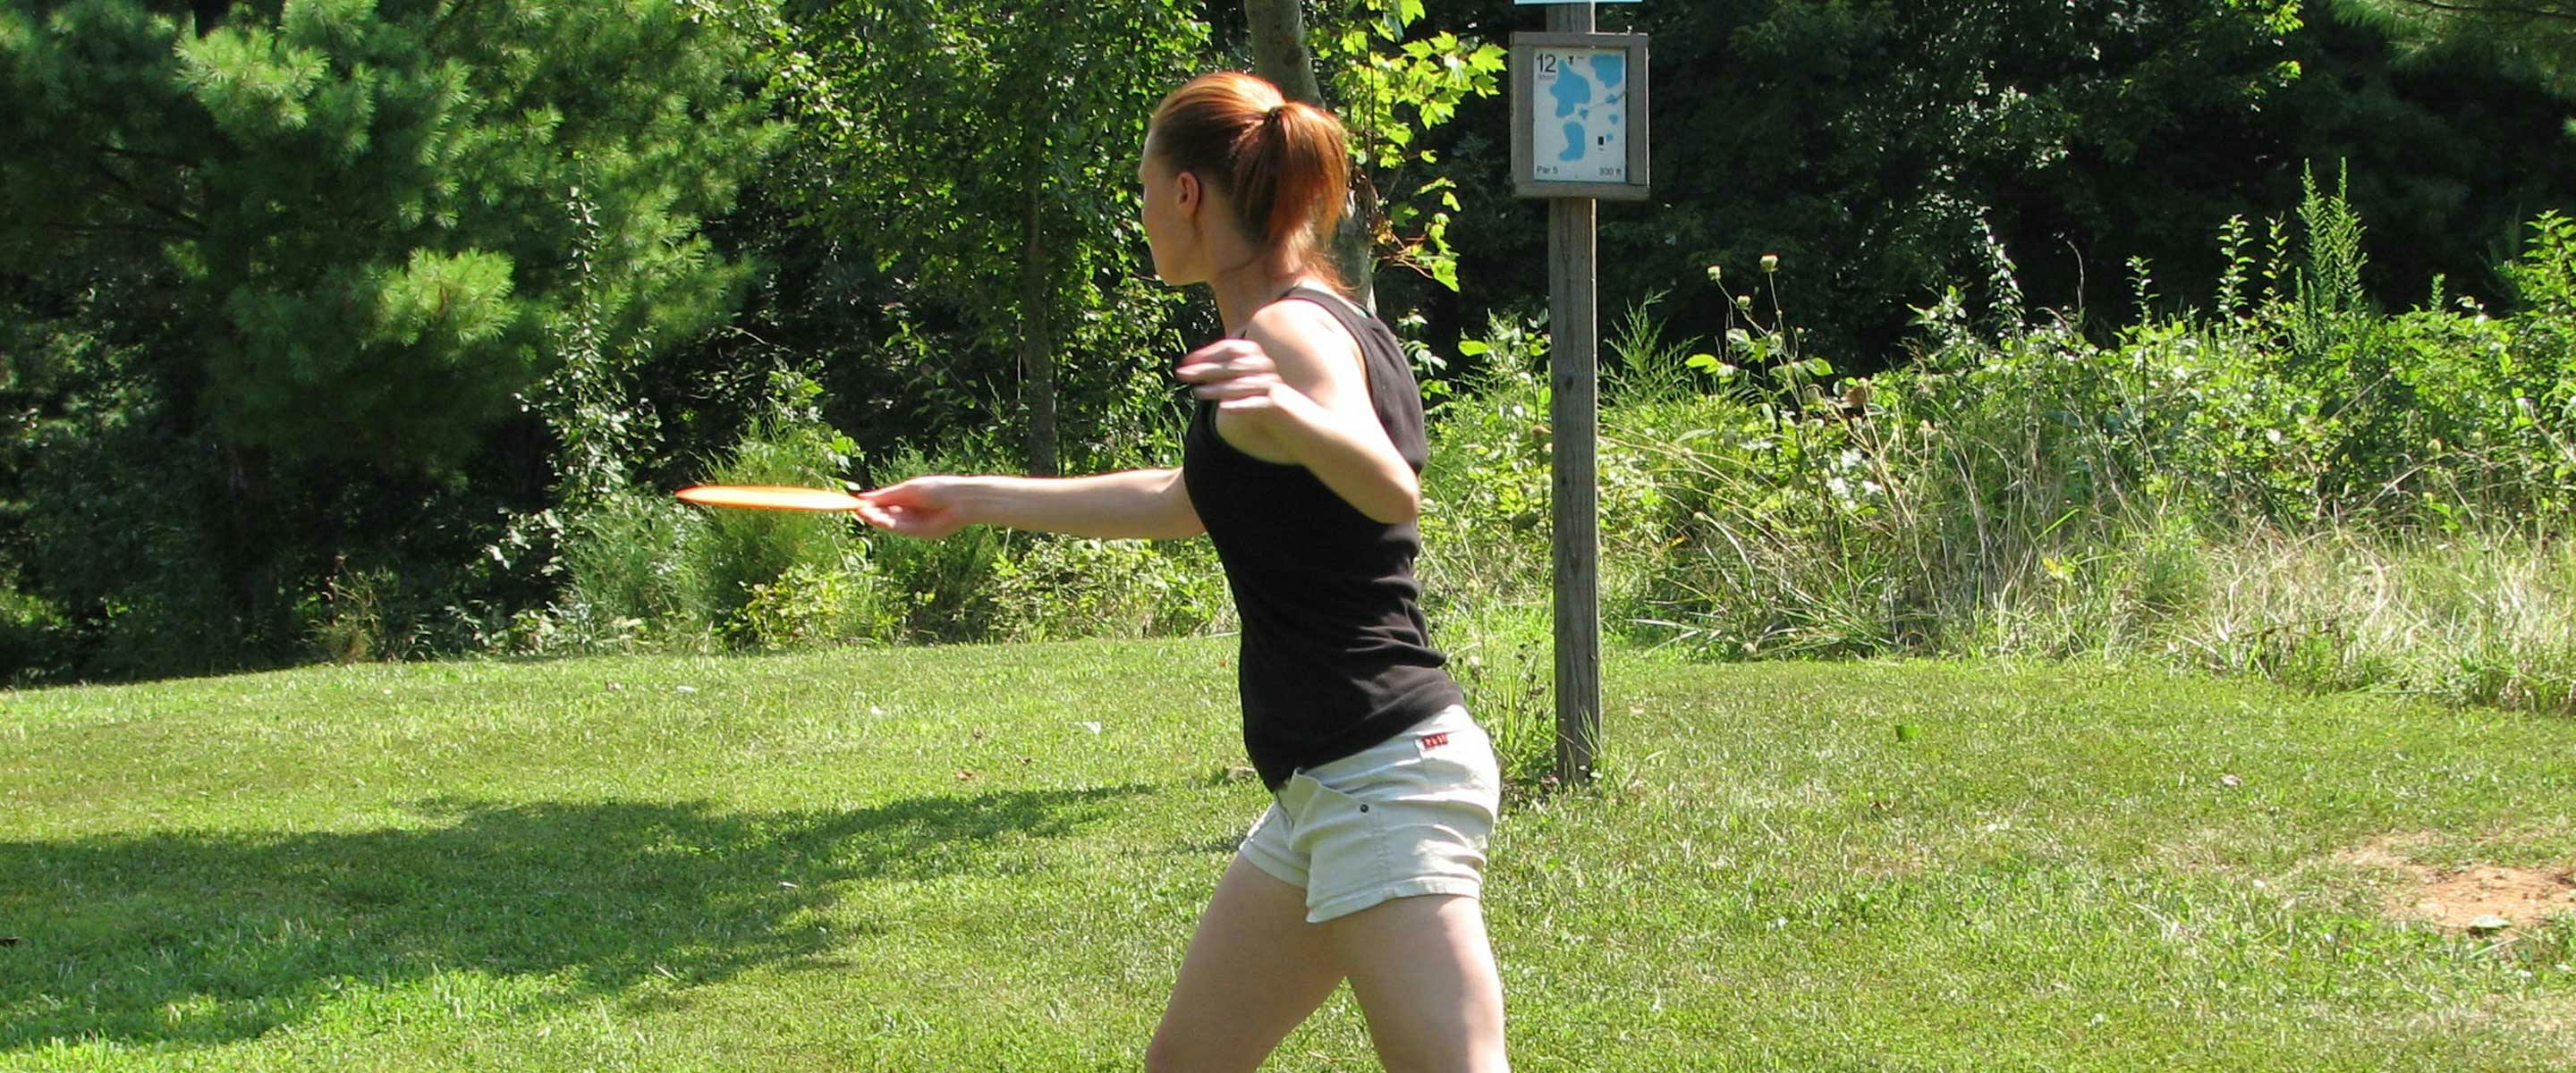 girl throwing frisbee on course